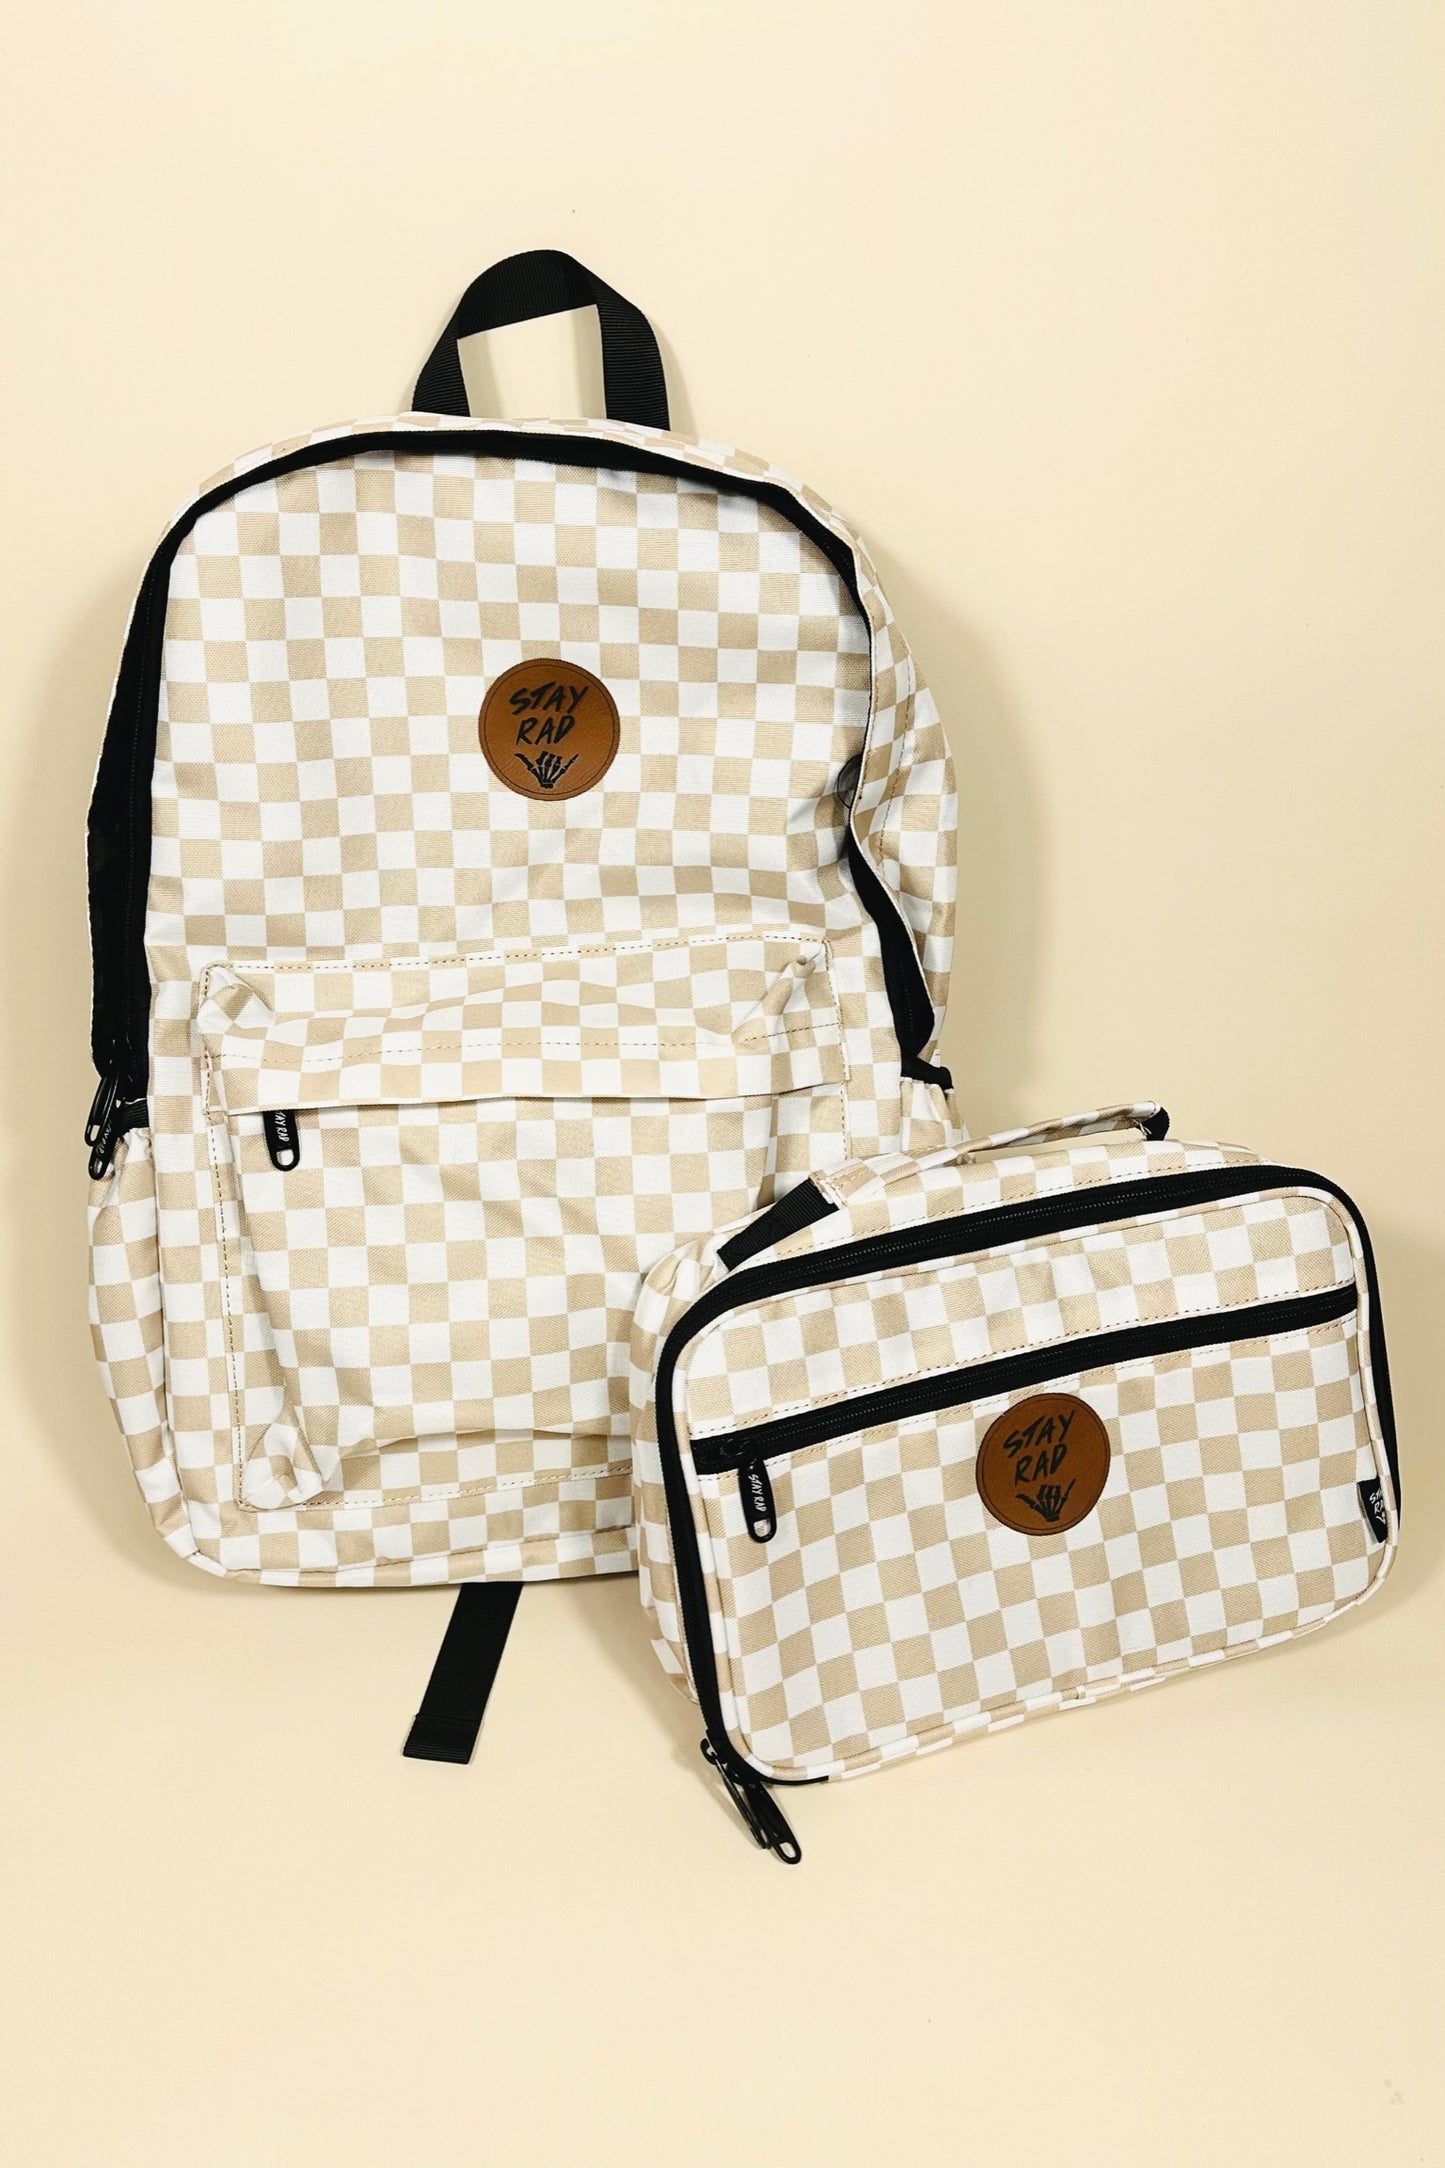 Stay Rad Checkered Backpack